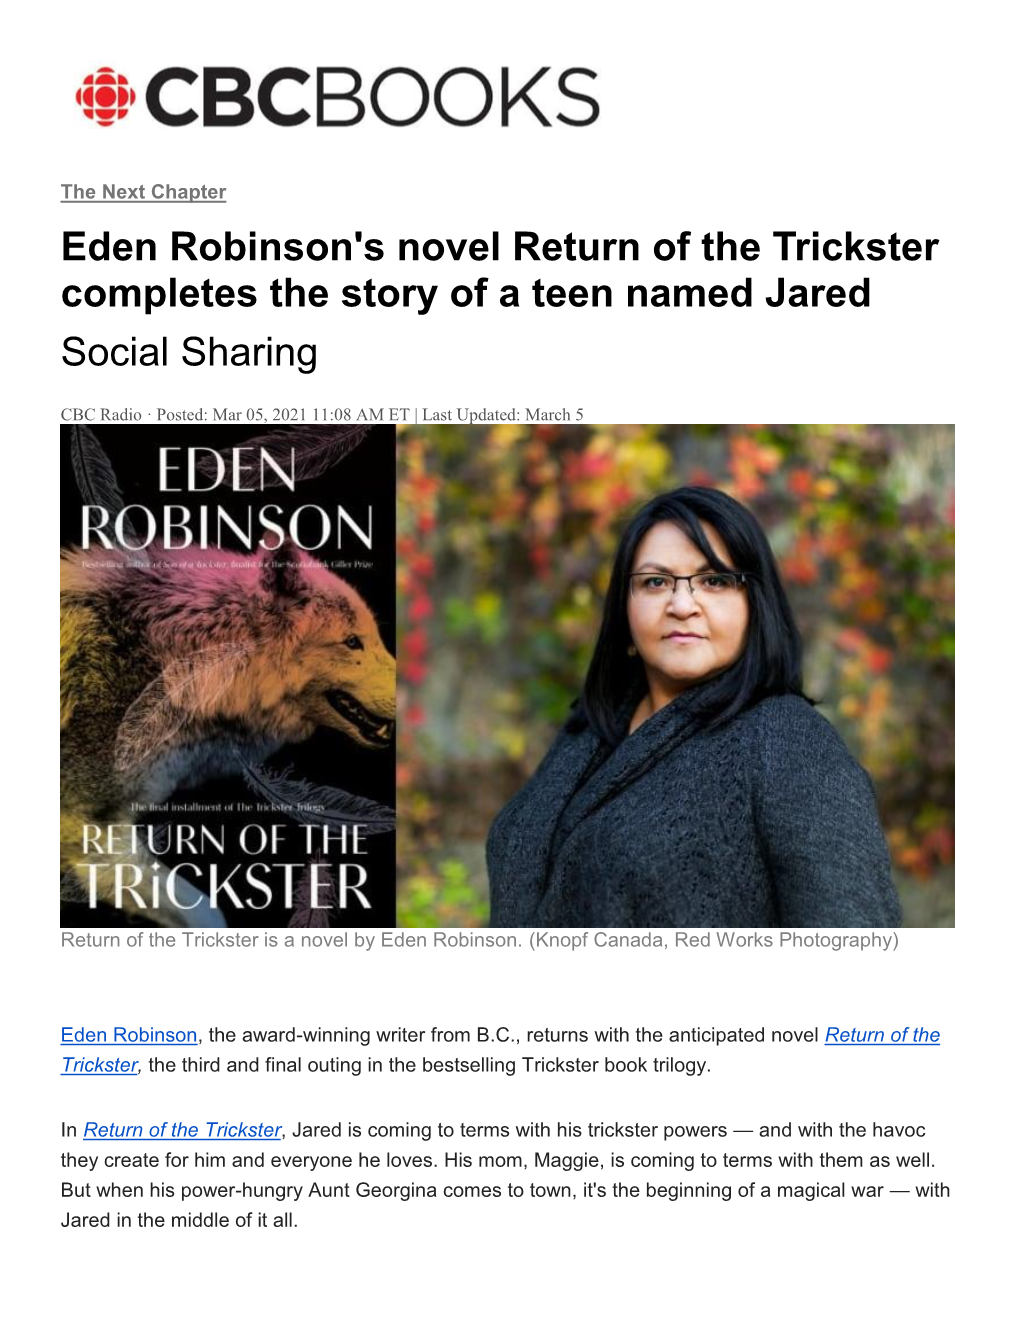 Eden Robinson's Novel Return of the Trickster Completes the Story of a Teen Named Jared Social Sharing